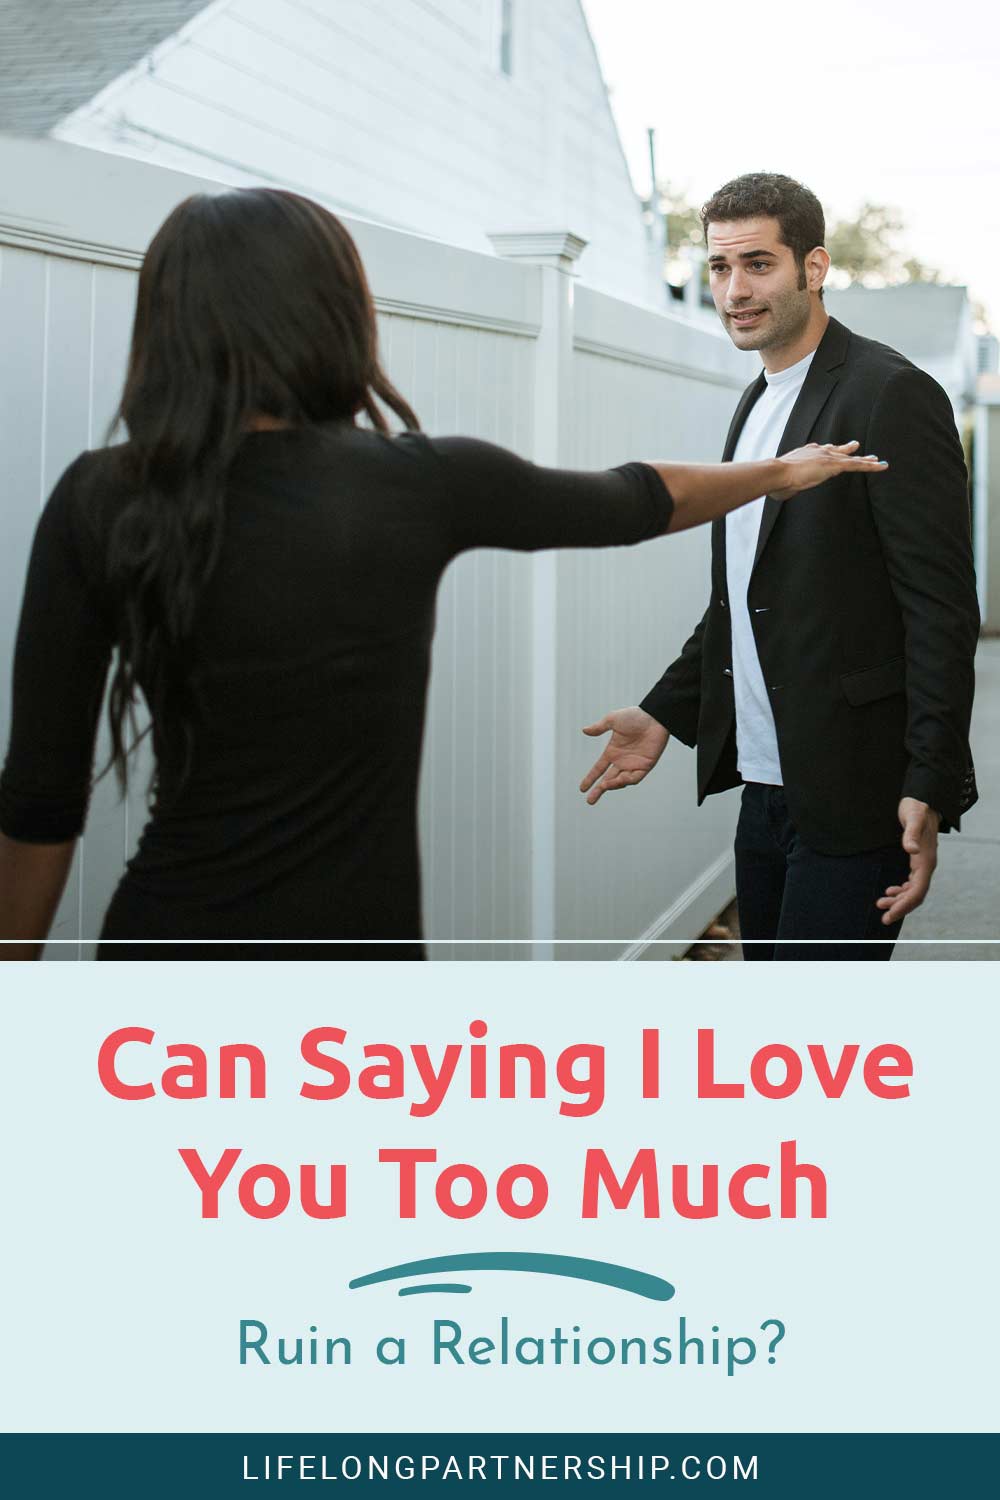 Couple are argueing about something near a house - Can Saying I Love You Too Much Ruin a Relationship?